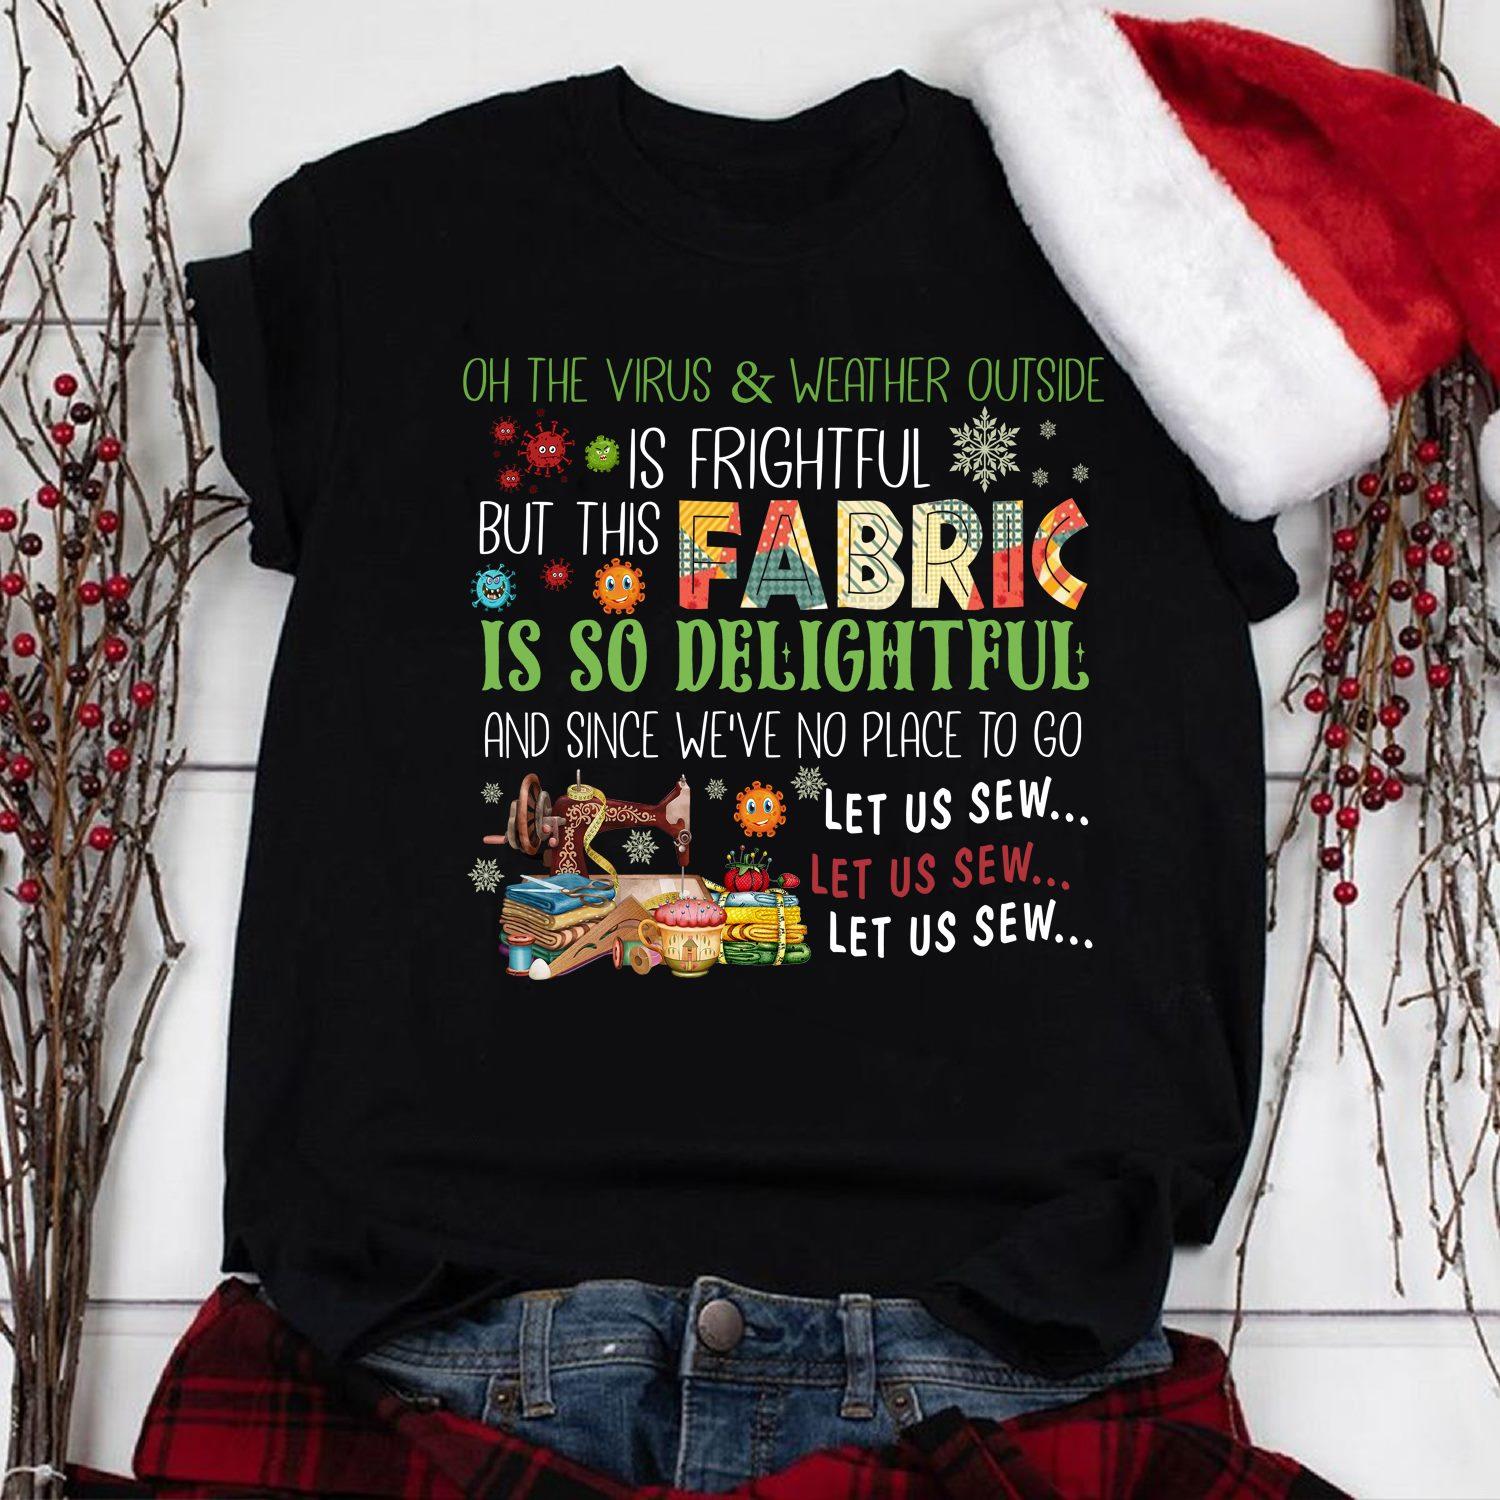 The virus and weather outside is frightful, fabric is so delightful - Christmas gift for sewers, sewing machine graphic T-shirt